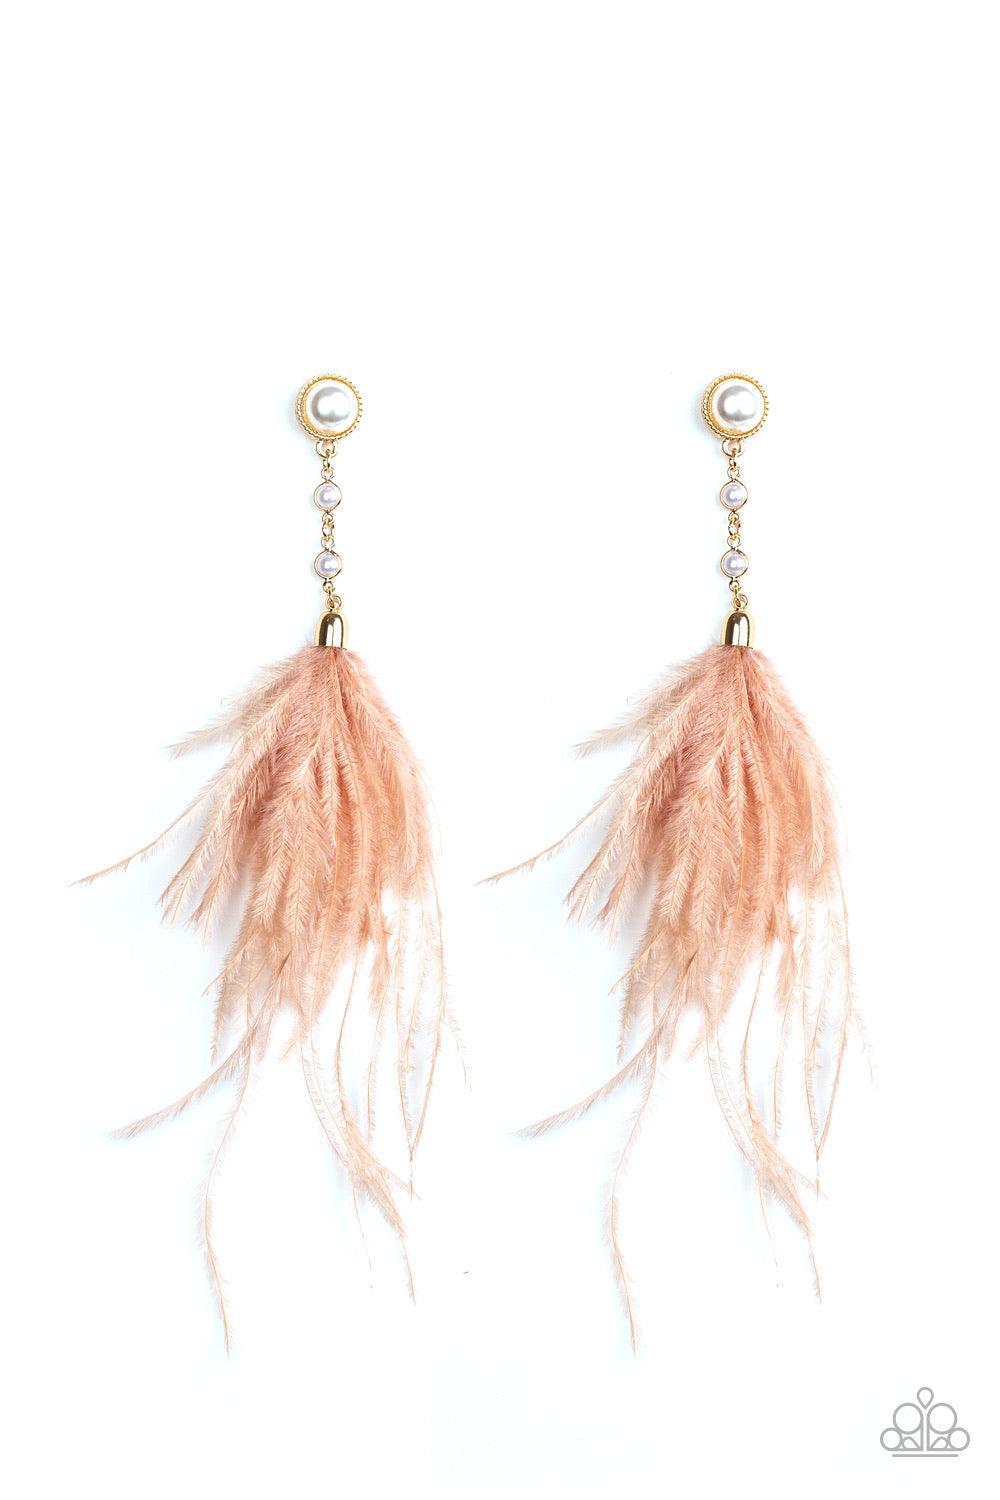 Paparazzi Accessories Vegas Vixen - Gold A plume of soft feathers flares out from the bottom of linked pearl-dotted gold frames for a refined flair. Earring attaches to a standard post fitting. Jewelry